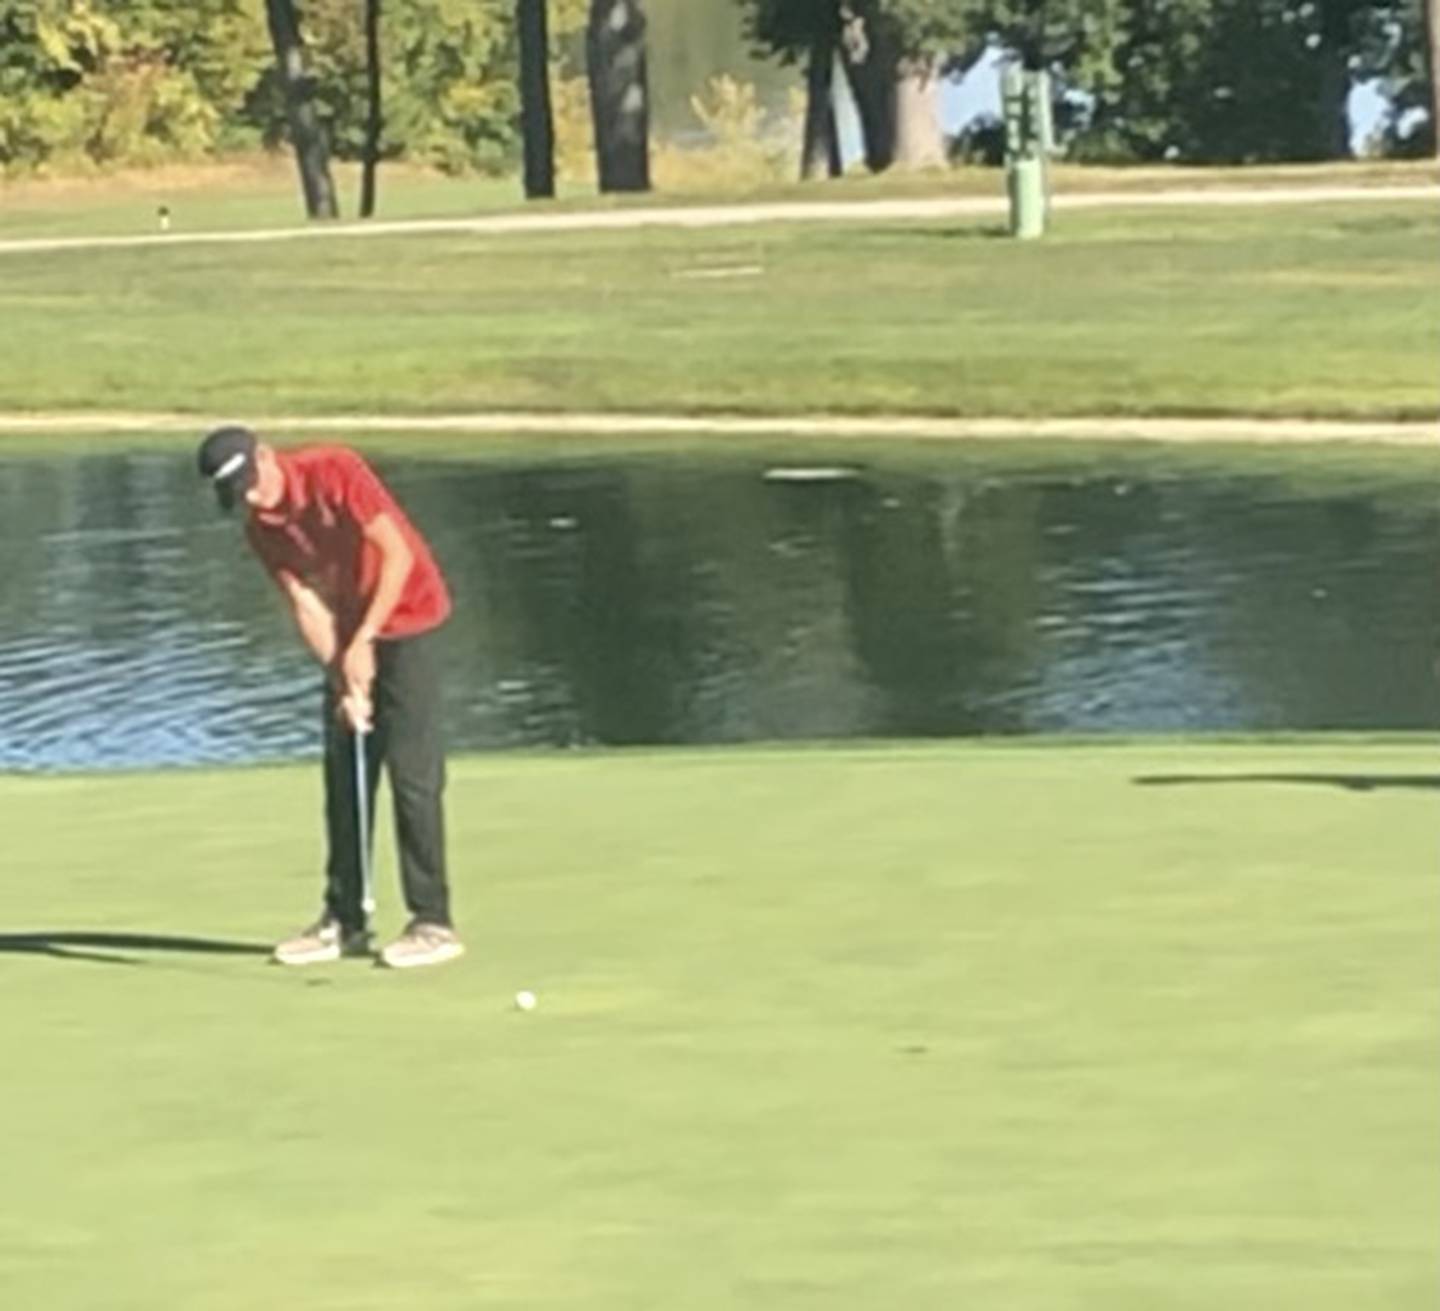 Hall sophomore Landen Plym putts on hole No. 18 in Monday's sectional at TPC John Deere Run in Silvis.